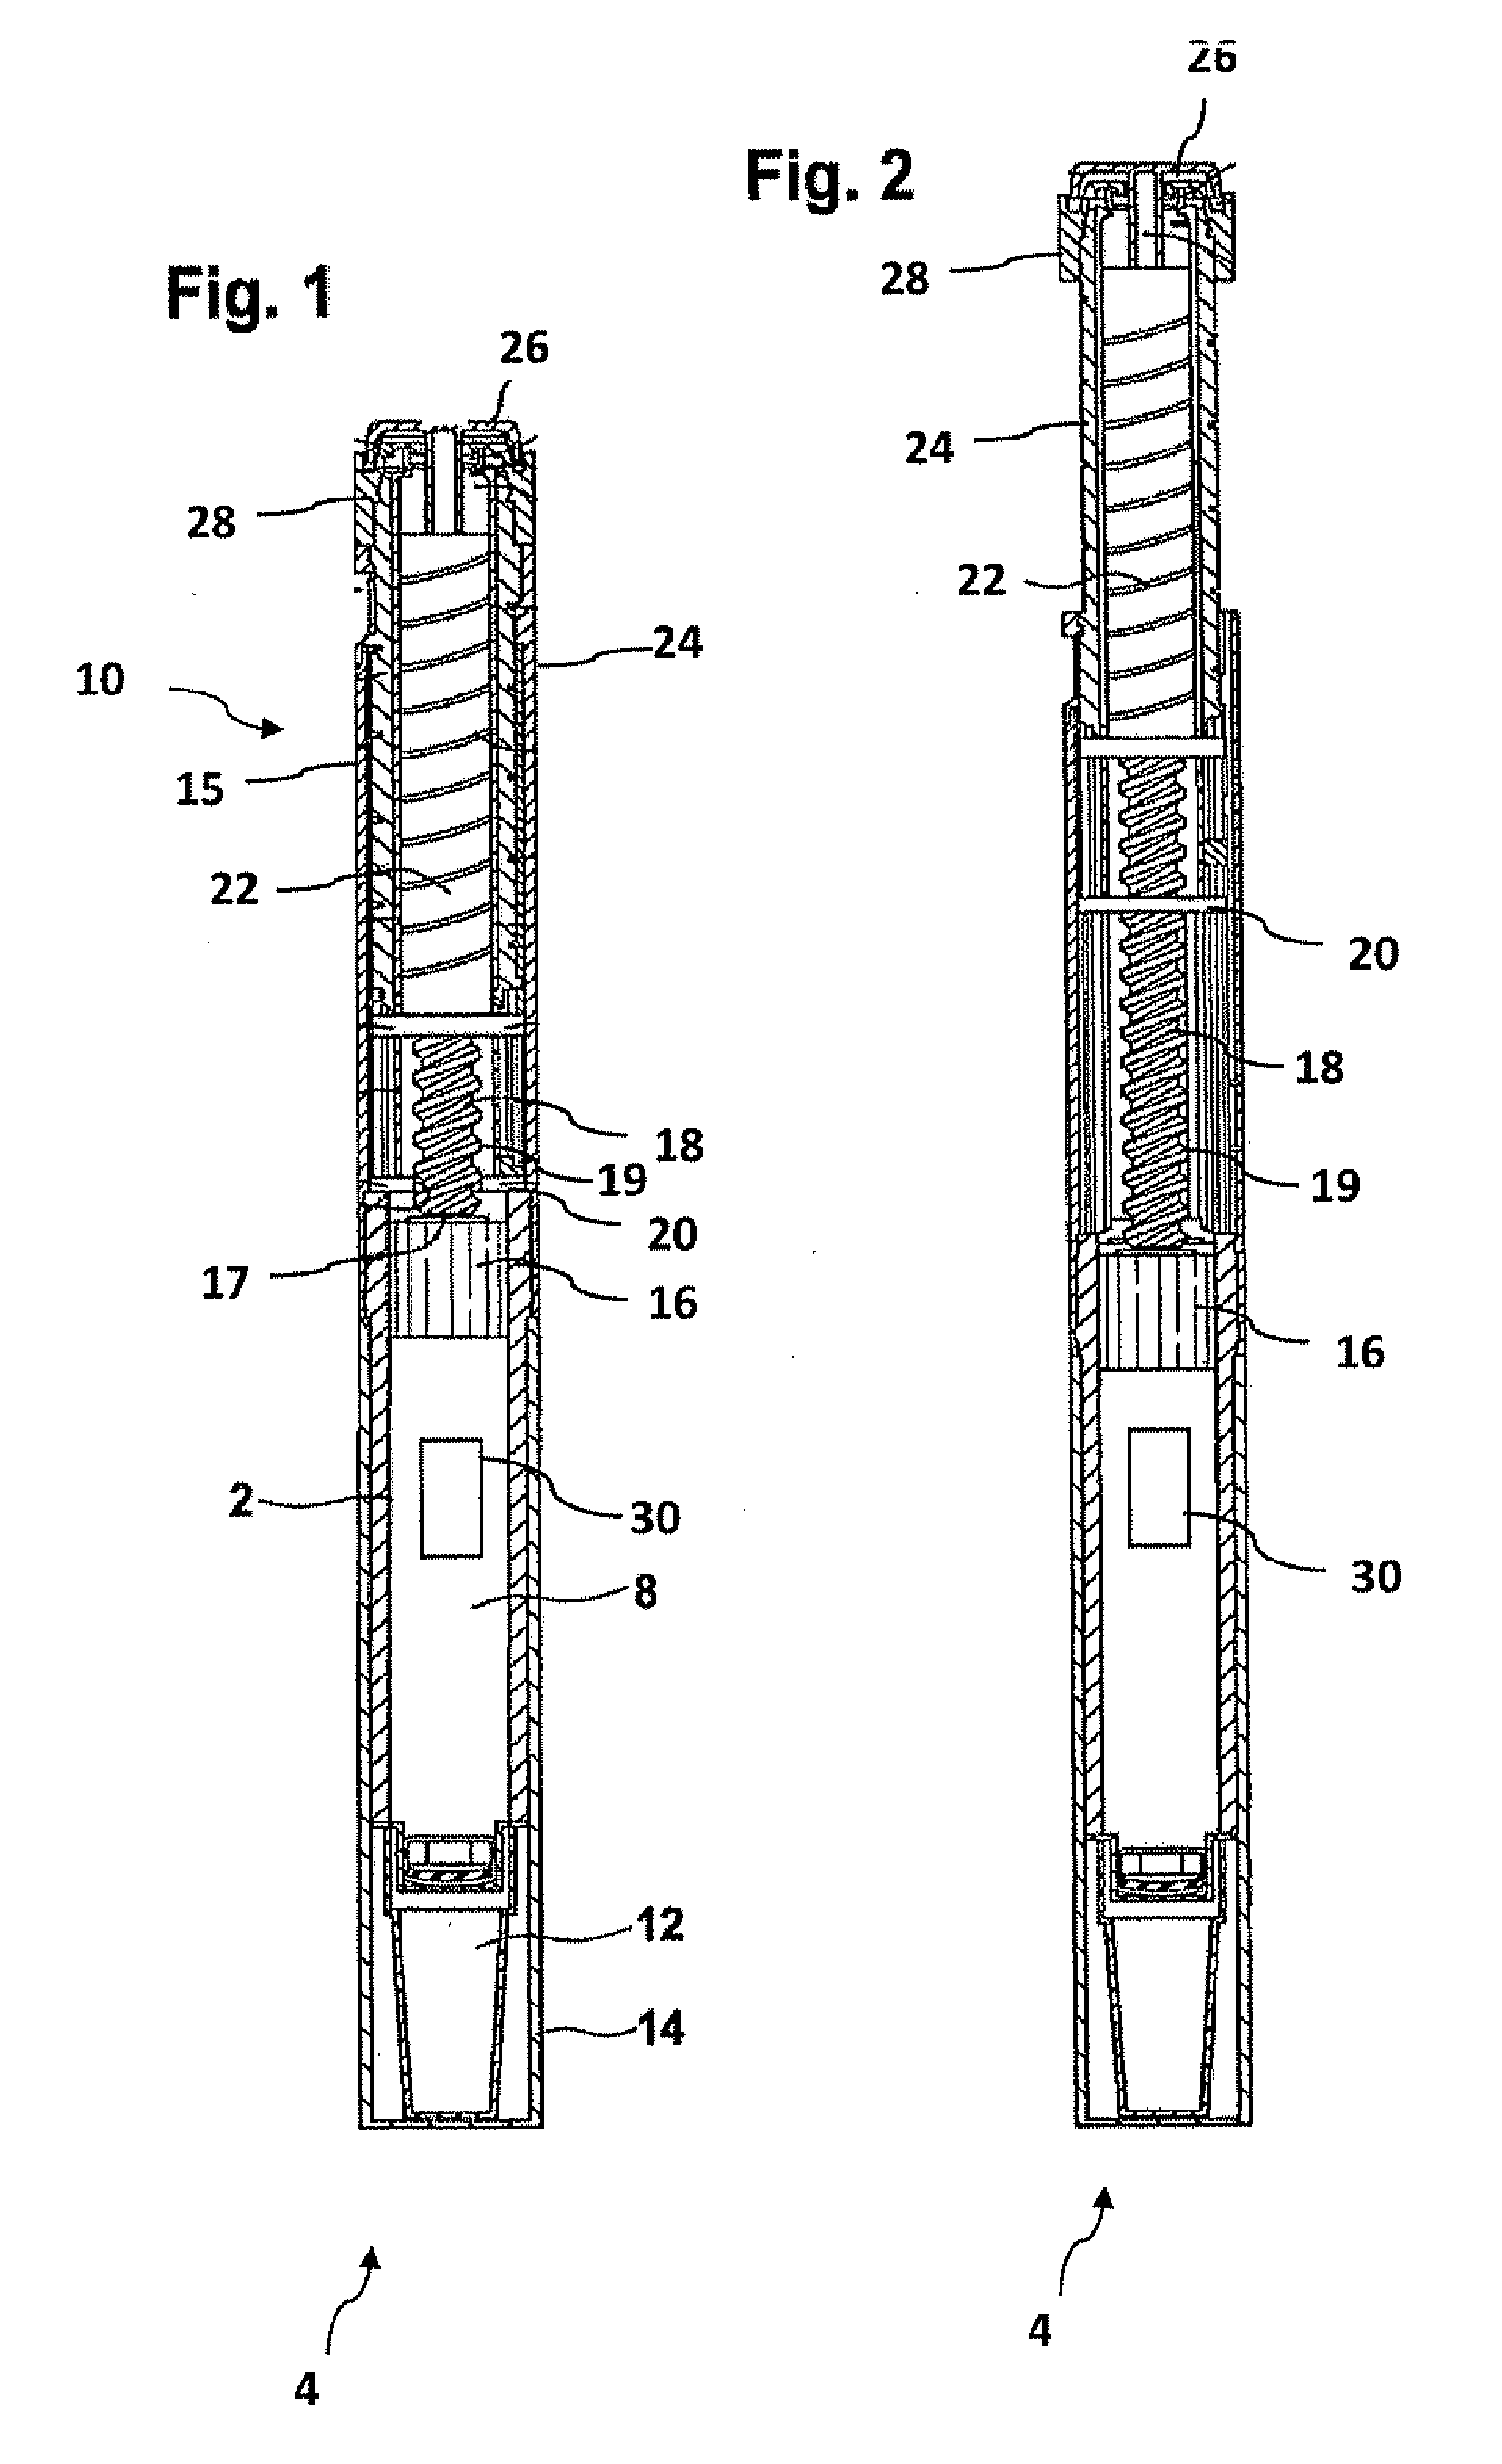 Drug Delivery Device and Associated Packaging